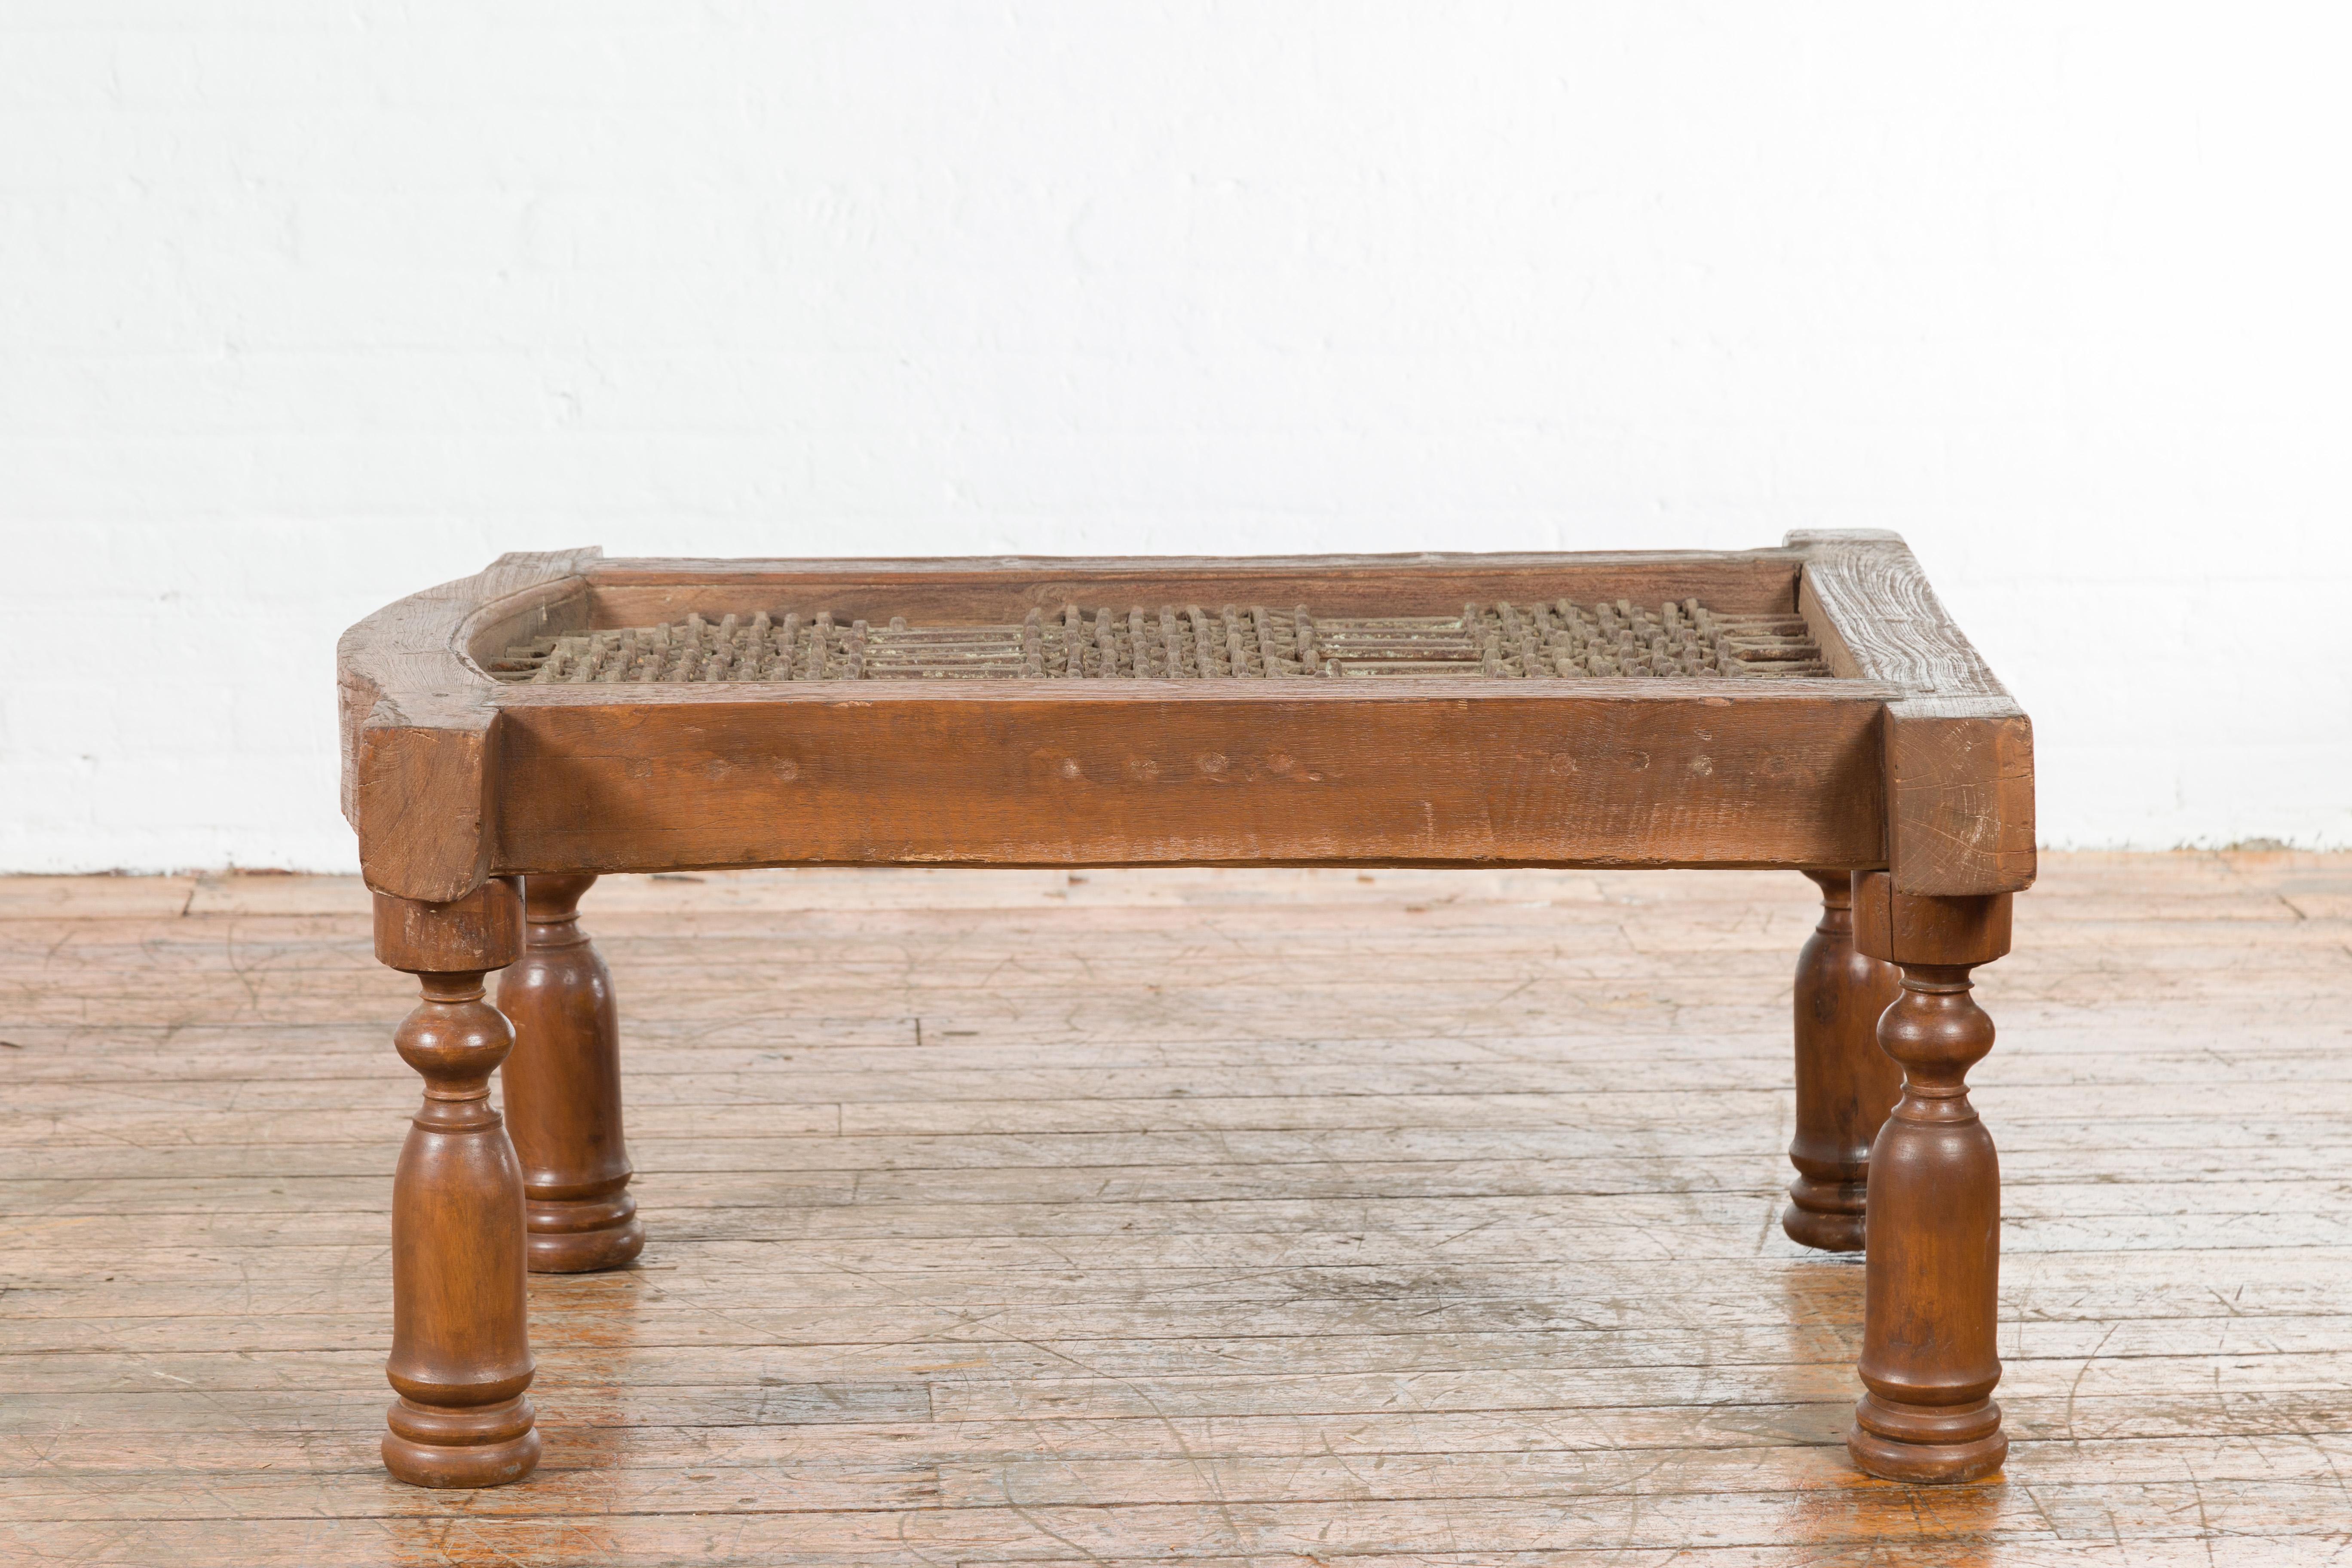 Antique Indian Arched Window Grate Made into a Coffee Table with Baluster Legs For Sale 3